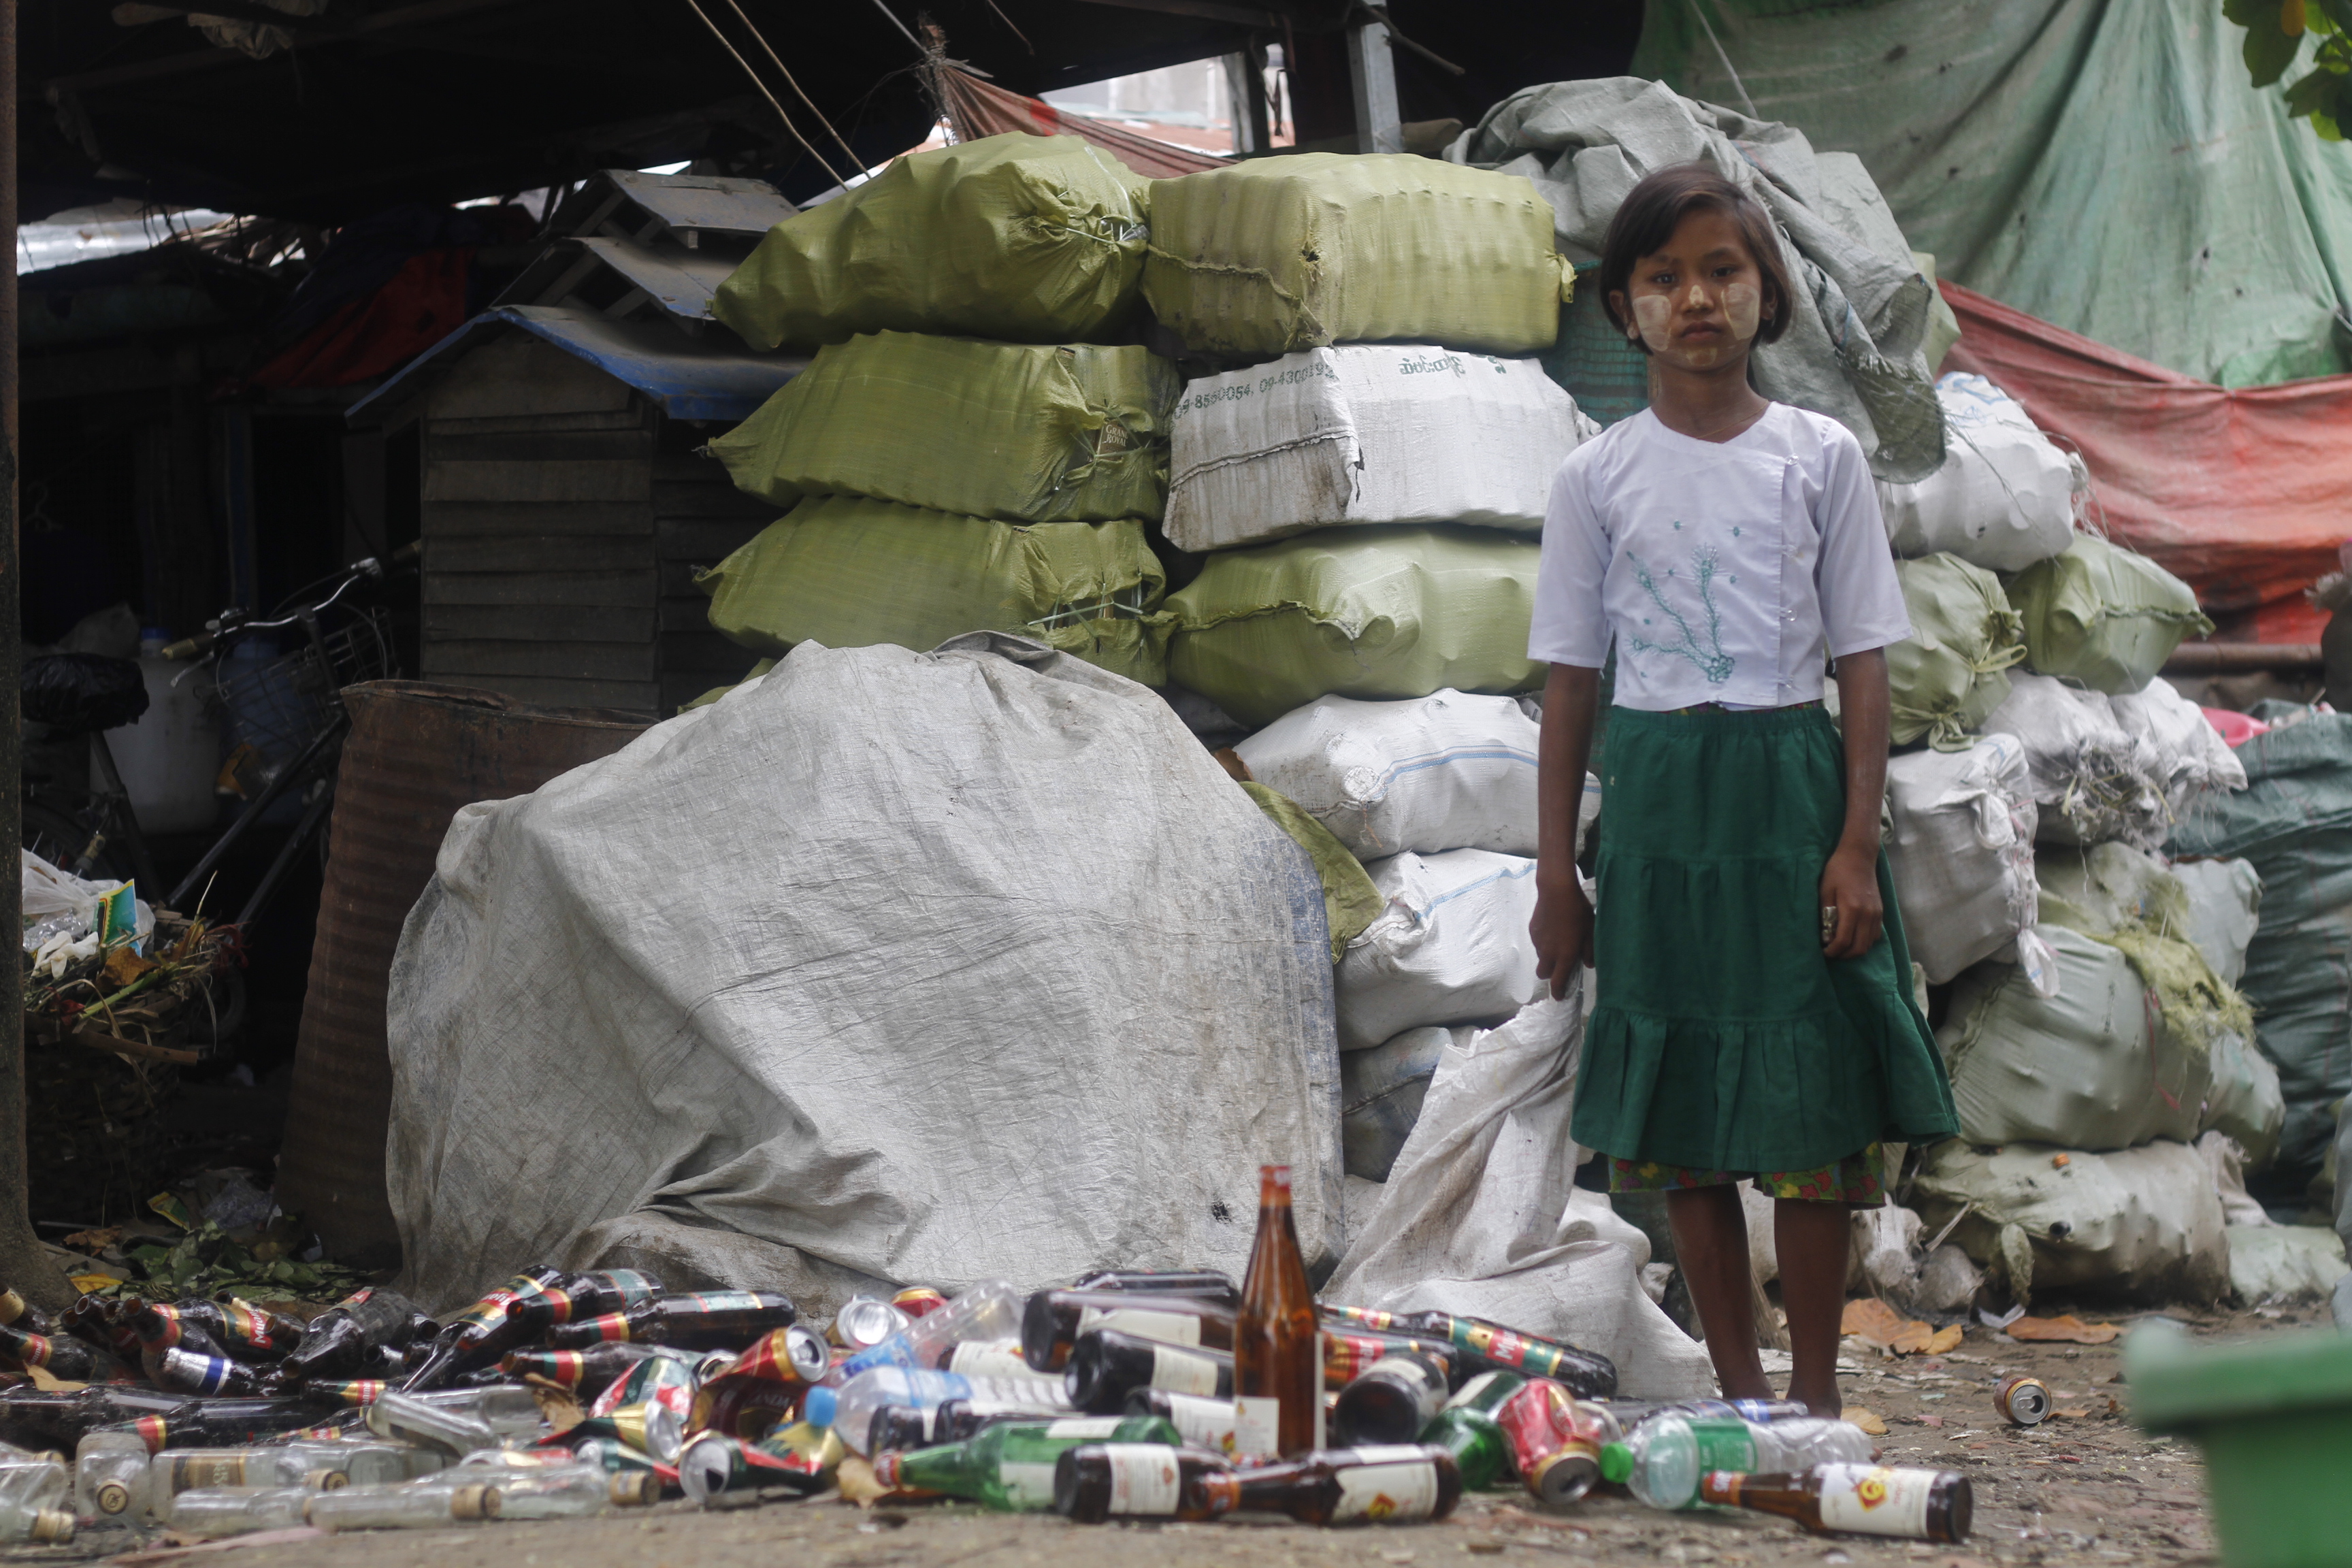 Ei Ei Thein, 13, collects recyclable bottles from rubbish tips to support her family. (Lorcan Lovett / Southeast Asia Globe)